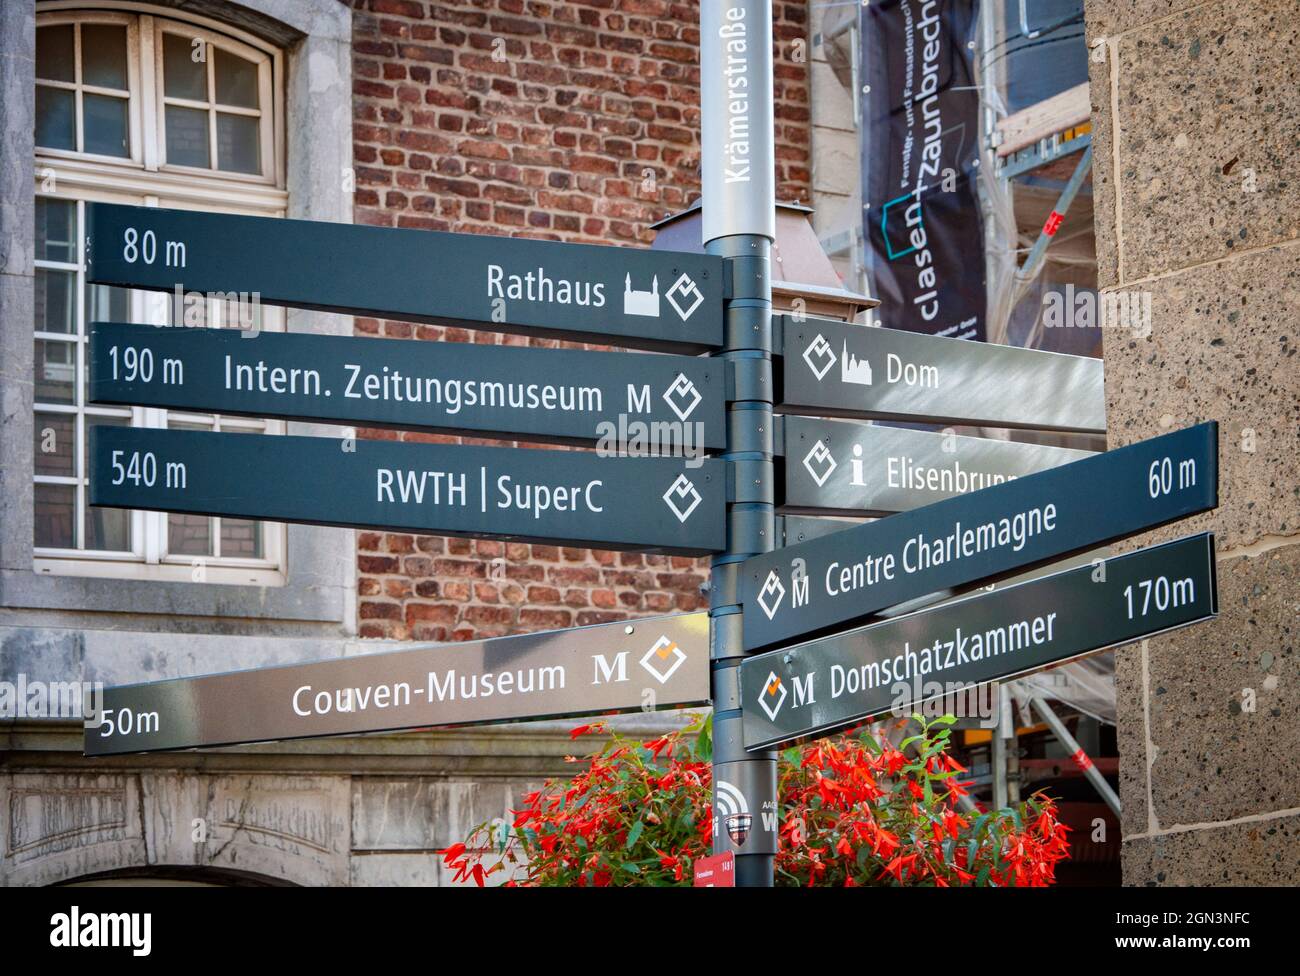 AACHEN, GERMANY. OCTOBER 04, 2020 Charlemagne Rathaus Direction signboards Stock Photo